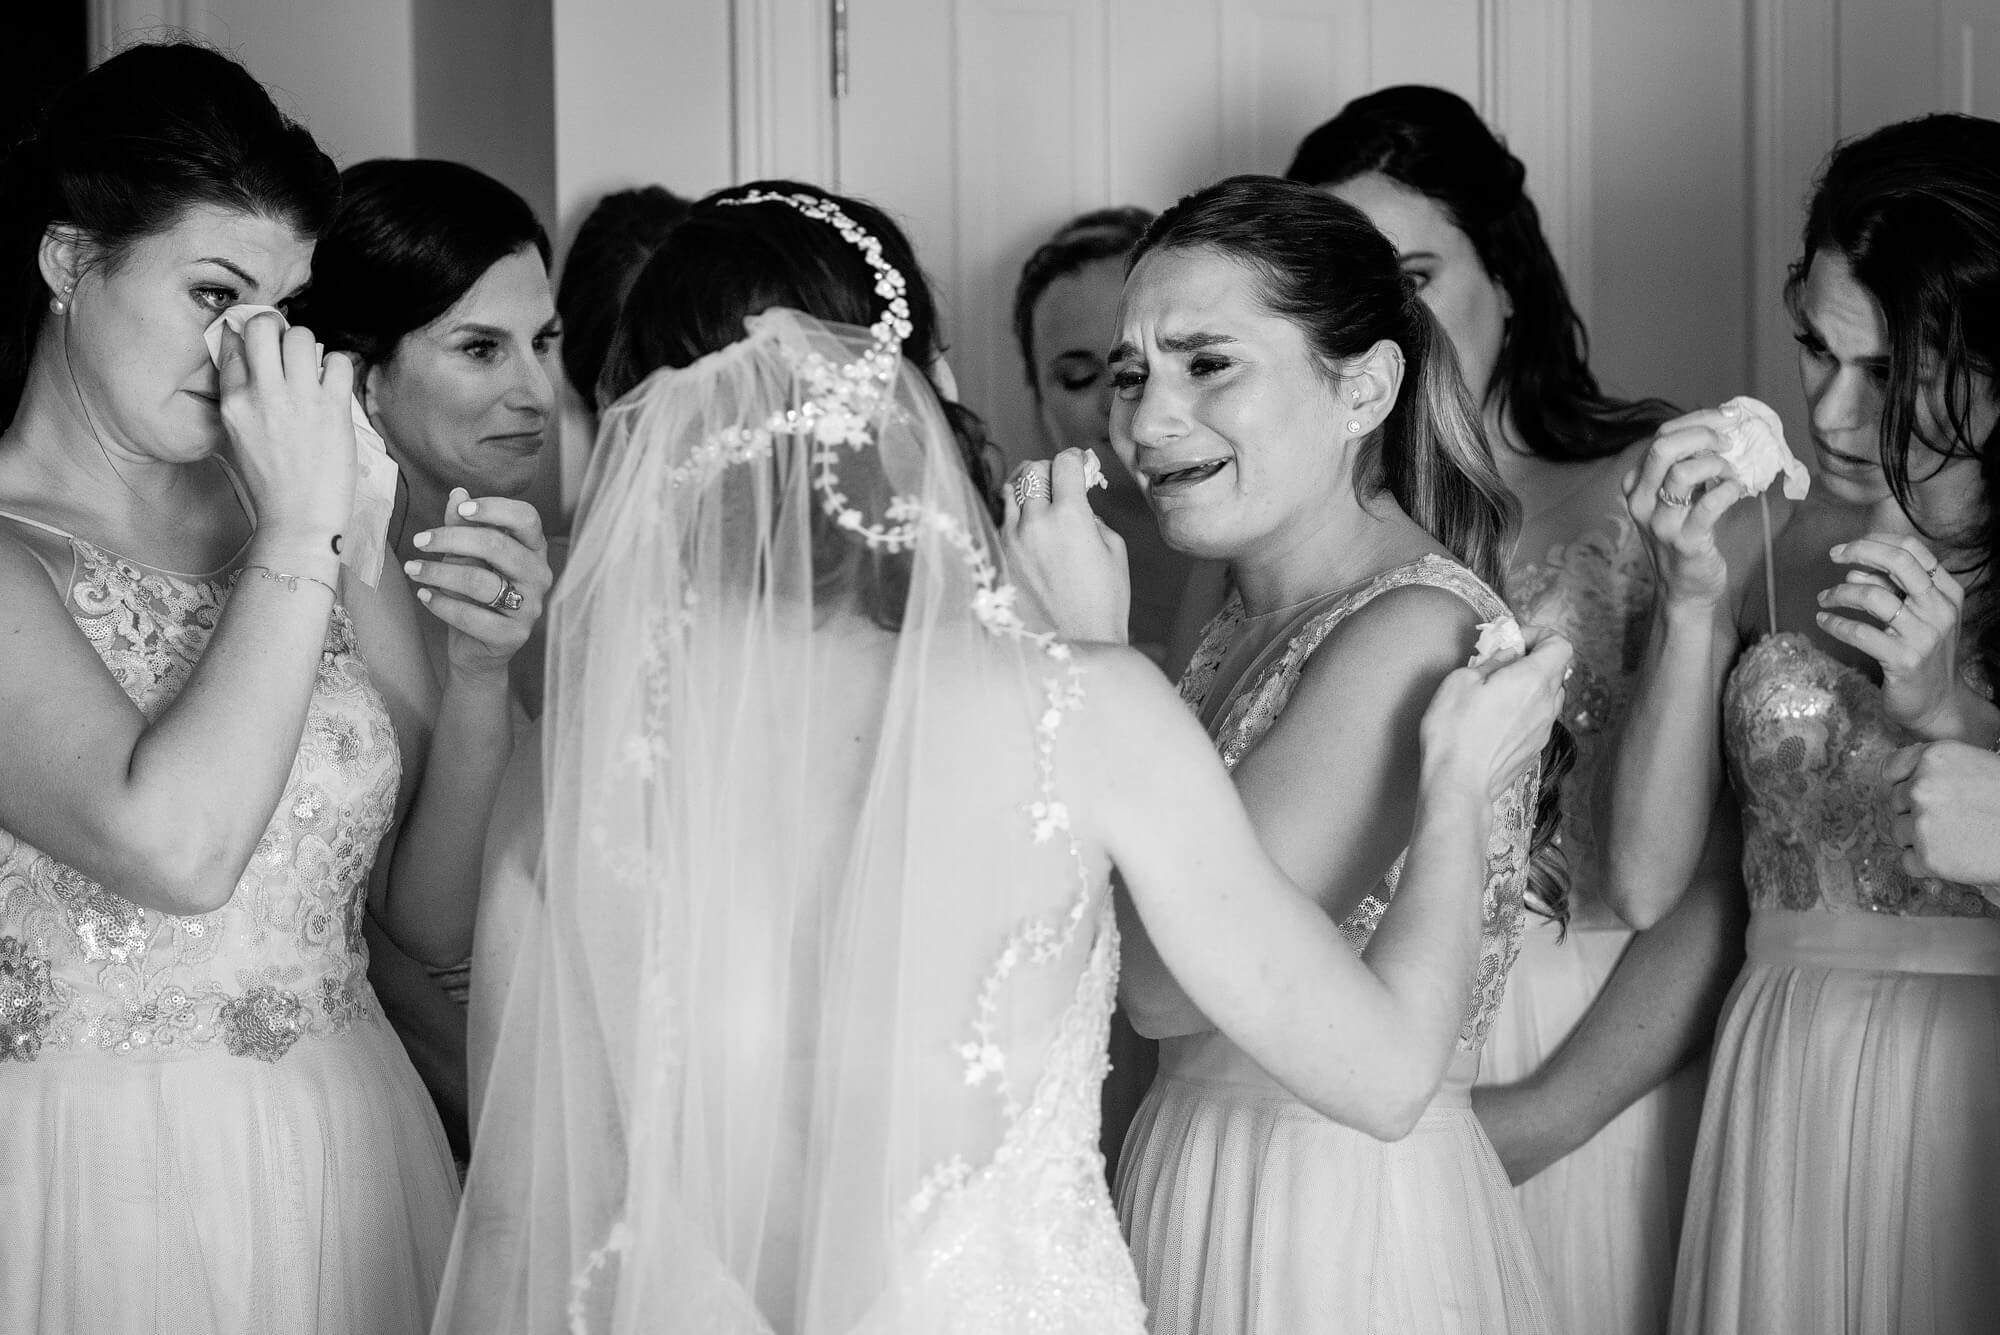 emotional bride and bridesmaids crying together before ceremony